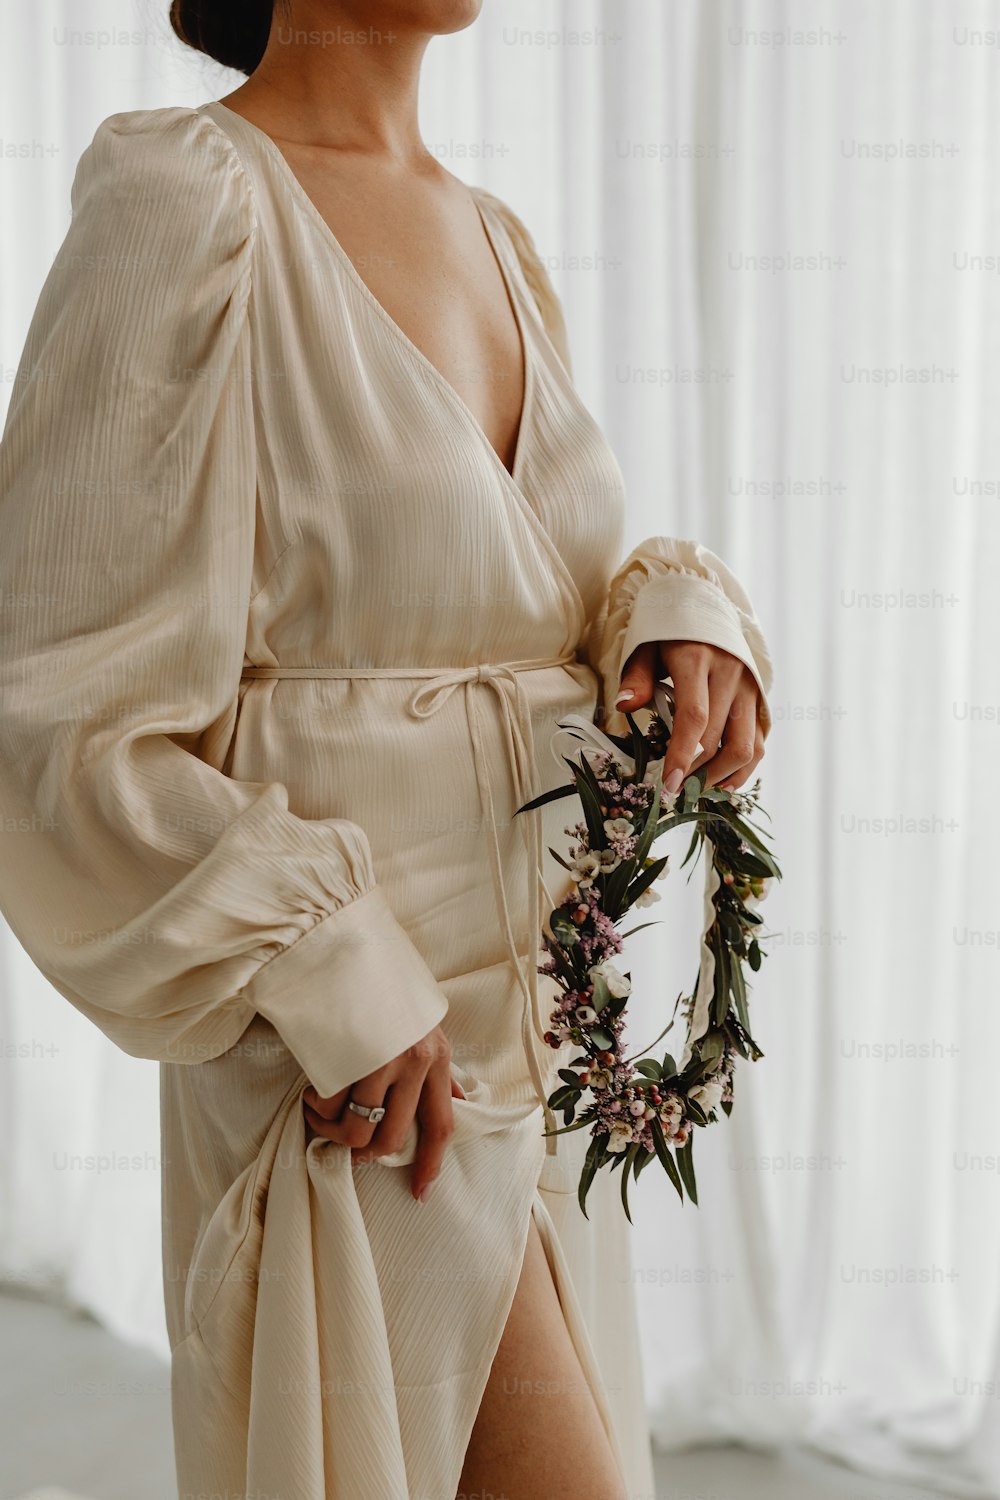 a woman in a dress holding a wreath